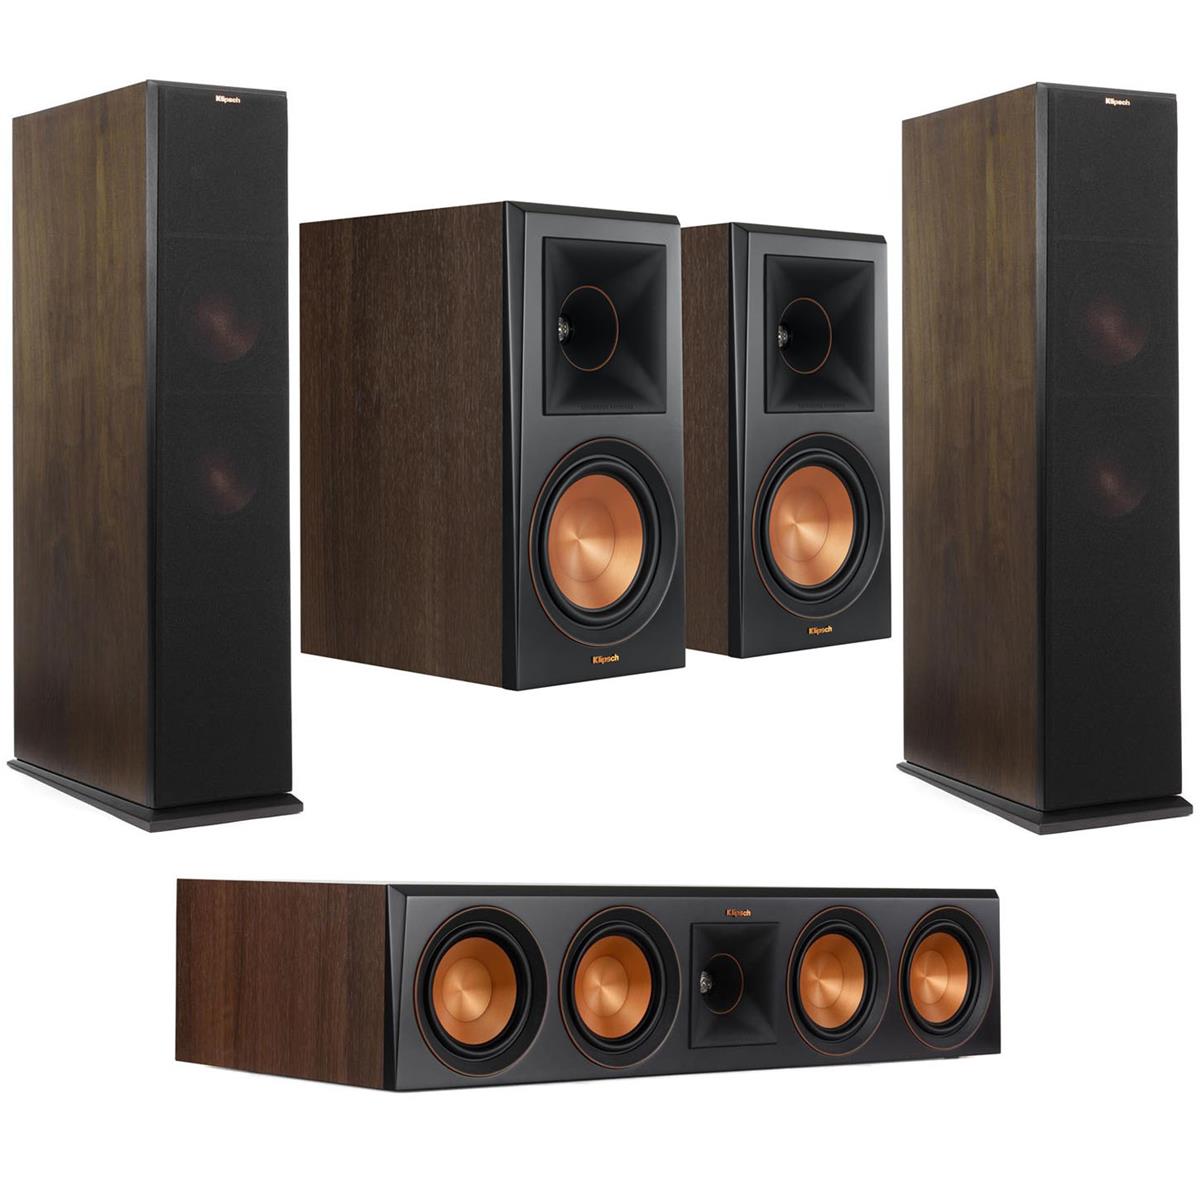 Klipsch Reference Premier Speakers: 2x RP-280FA, 2x RP-600M, RP-504C $1399 + free s/h & More